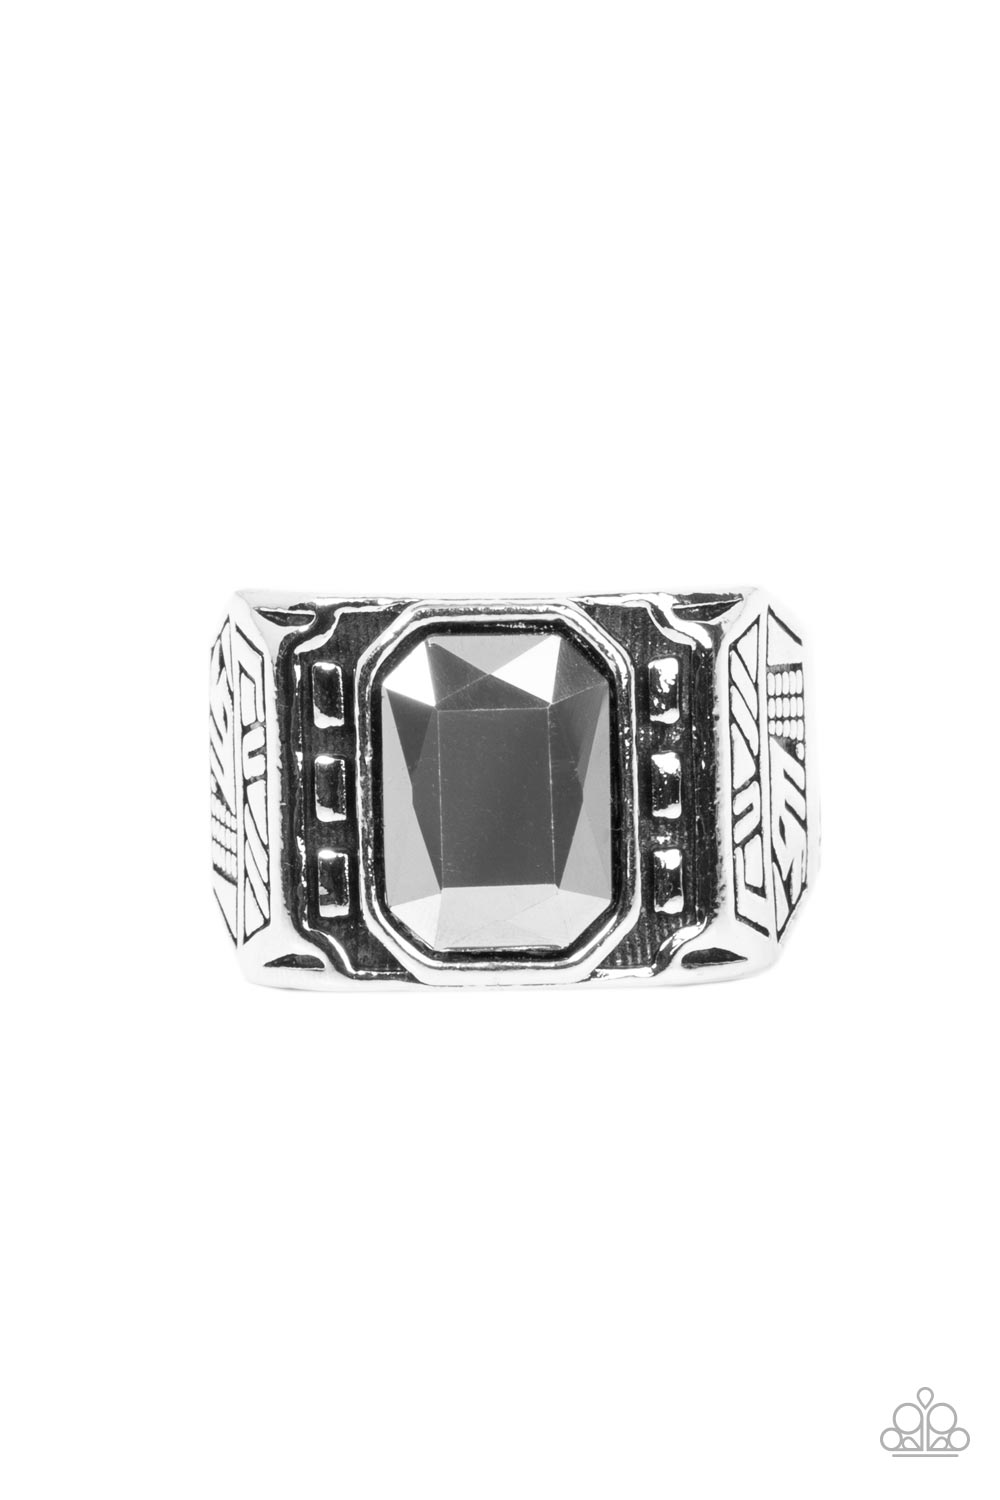 Metro Magnate Silver Urban Ring - Paparazzi Accessories  A majestic emerald cut hematite rhinestone is pressed into the center of a rectangular studded silver frame flanked by geometric texture, creating an edgy centerpiece atop the finger. Features a stretchy band for a flexible fit.  Sold as one individual ring.